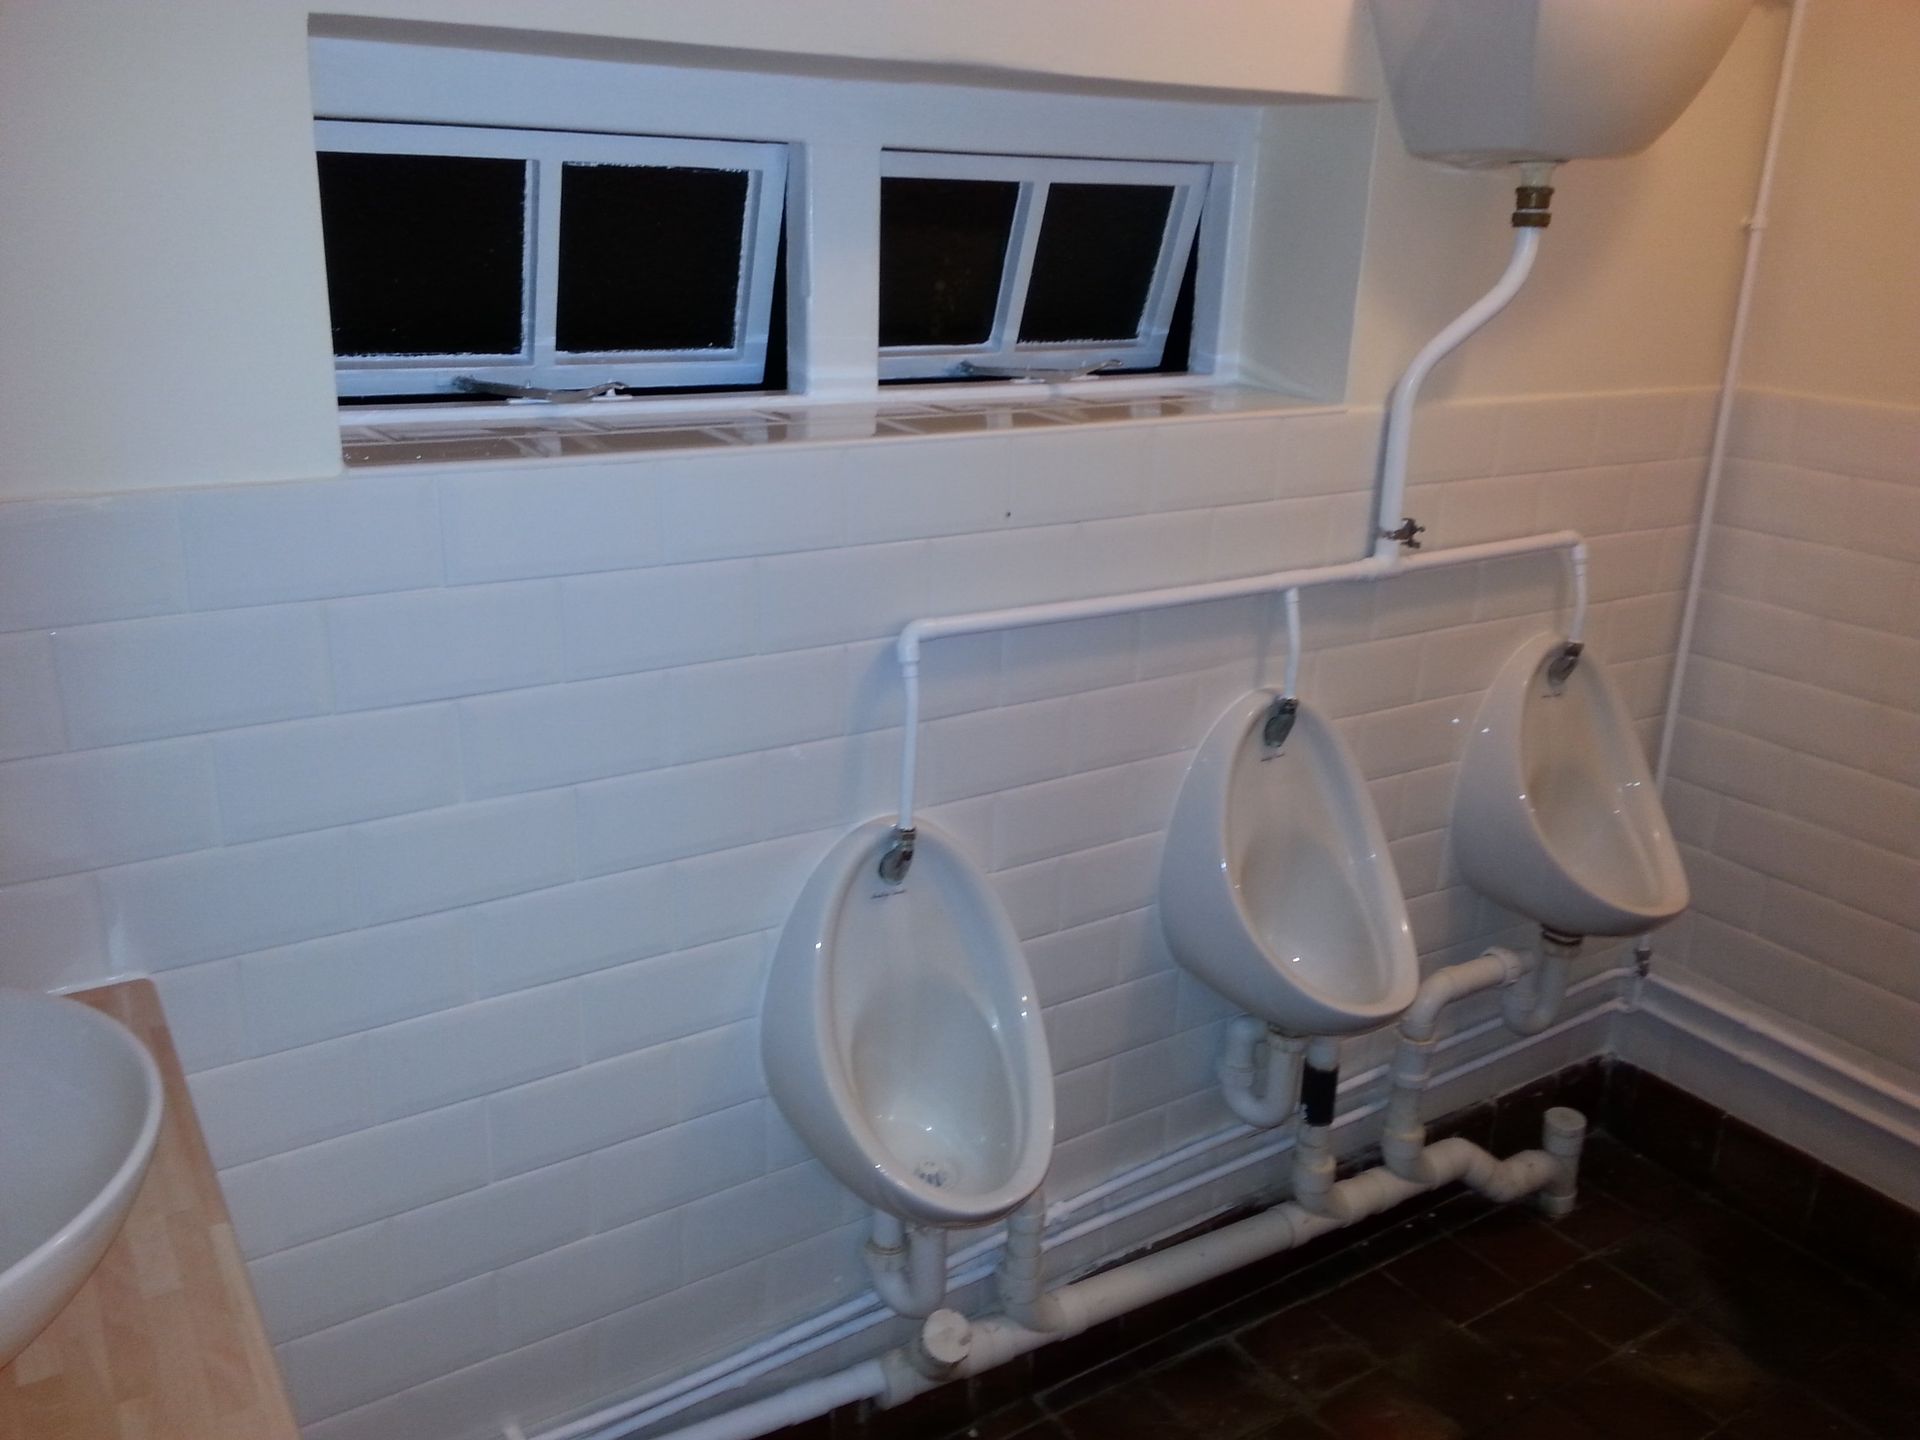 Toilet and urinal installation